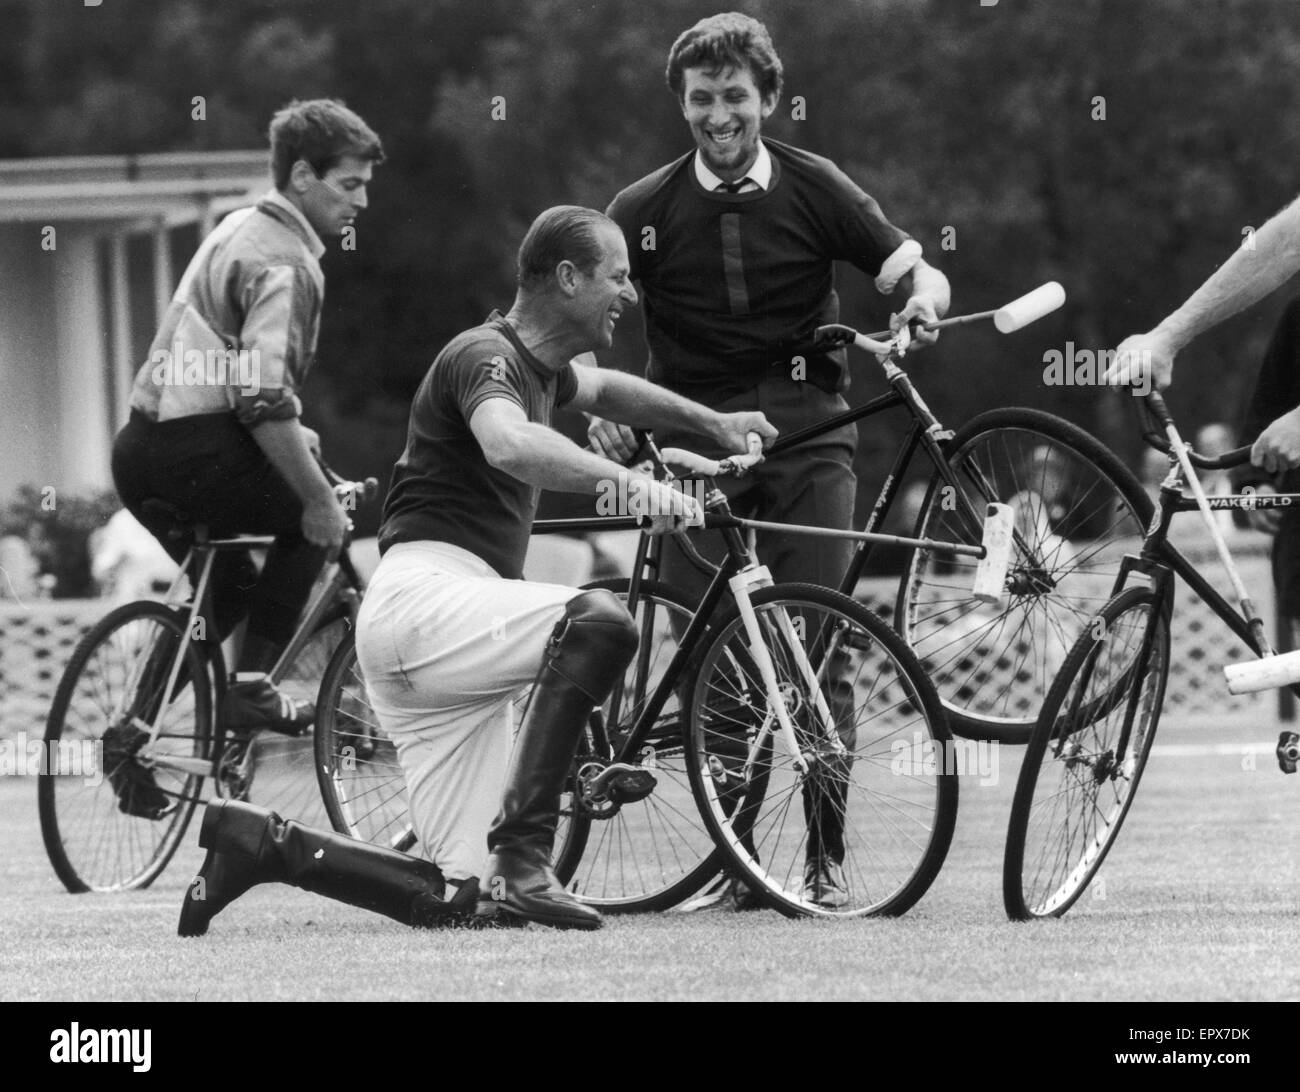 Prince Philip accepted the challenge of bicycle polo on the famous polo field at Windsor on 6th August 1967. He is pictured here after being unseated in a collision with a team mate at Windsor. The only casualty - one bent bicycle wheel. 6th August 1967. Stock Photo